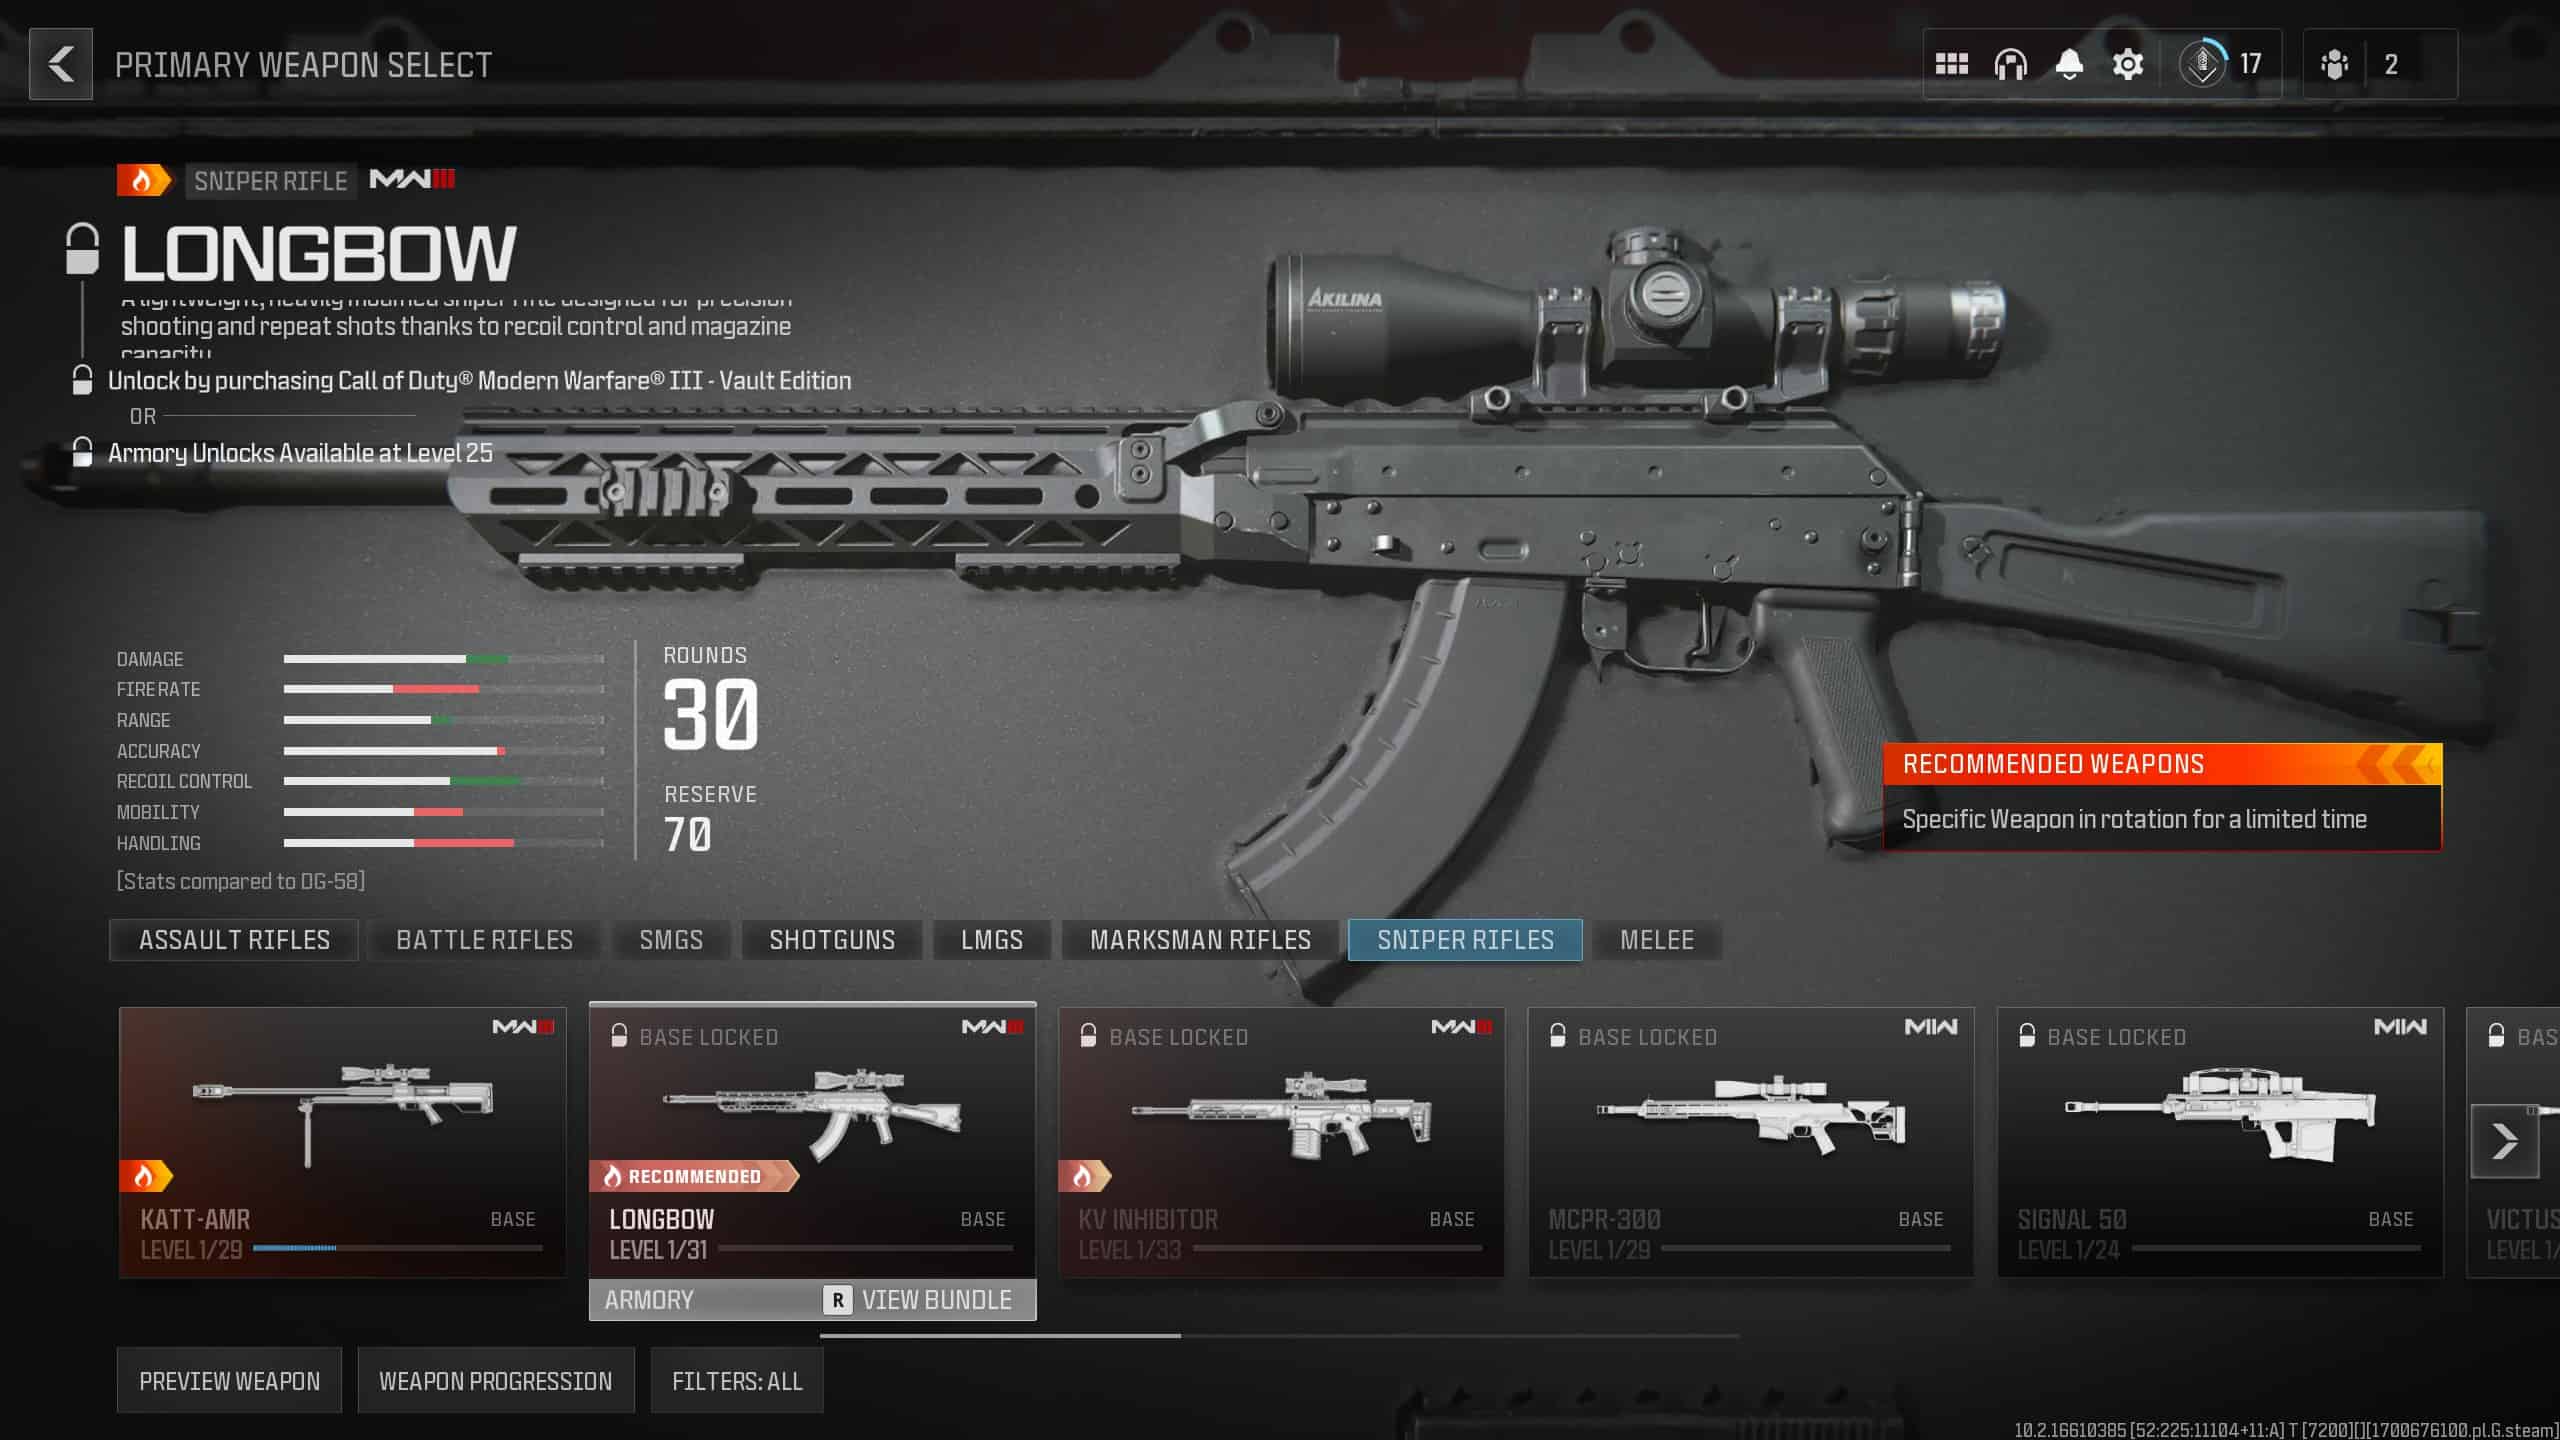 An image of the Longbow in the Gunsmith of MW3. Image captured by VideoGamer.